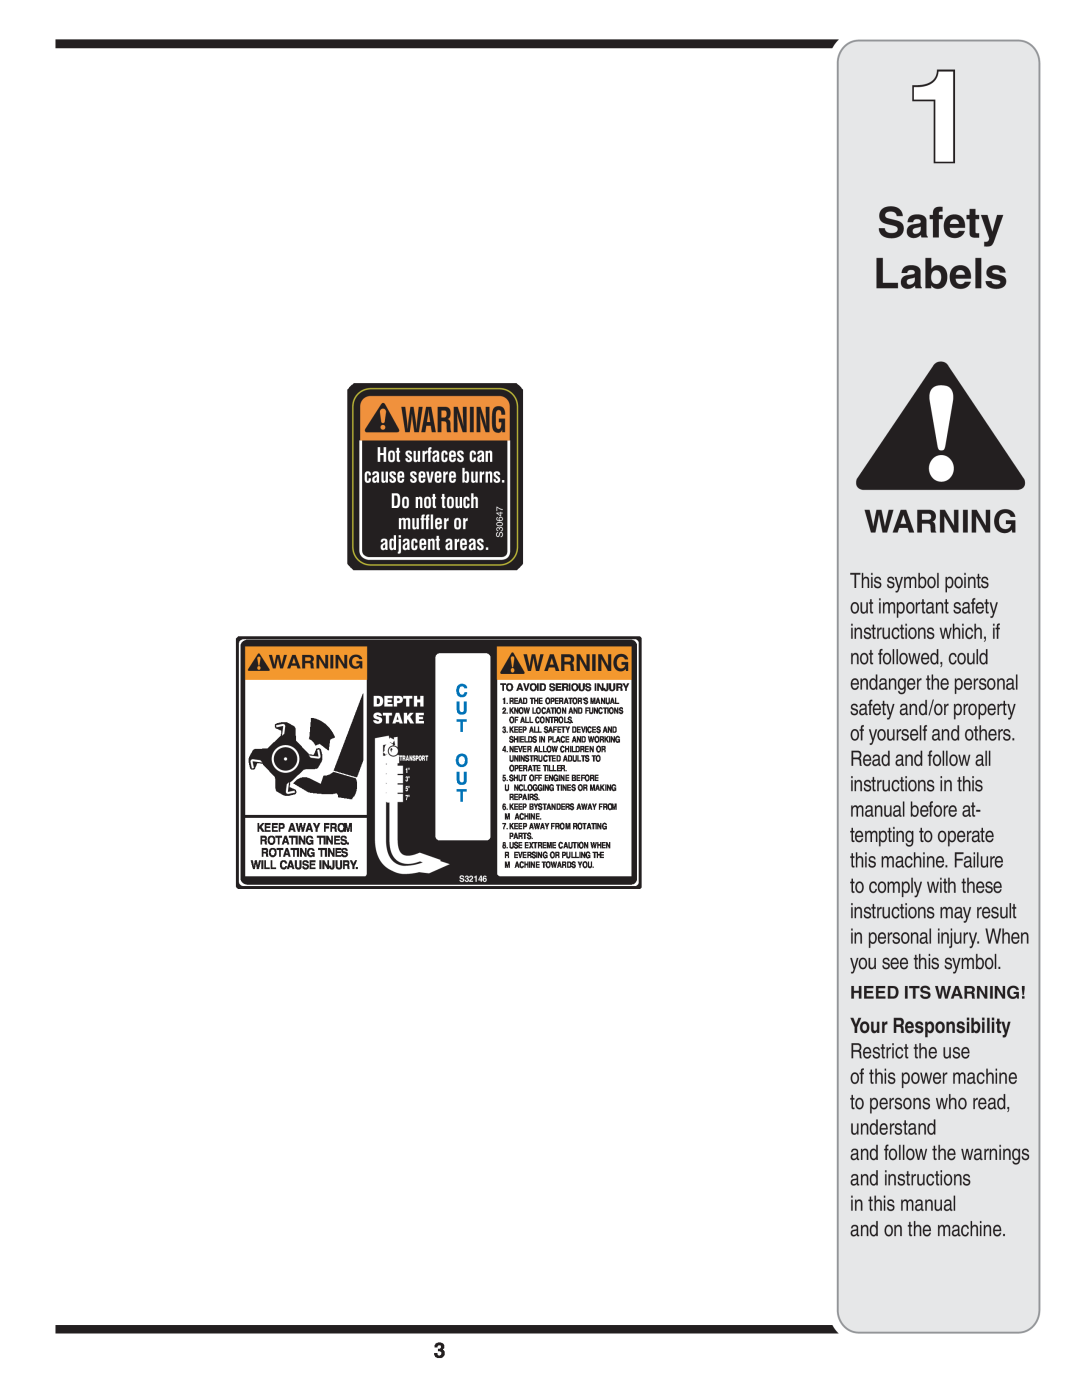 Cub Cadet 450 warranty Safety Labels, in this manual and on the machine, Hot surfaces can cause severe burns 